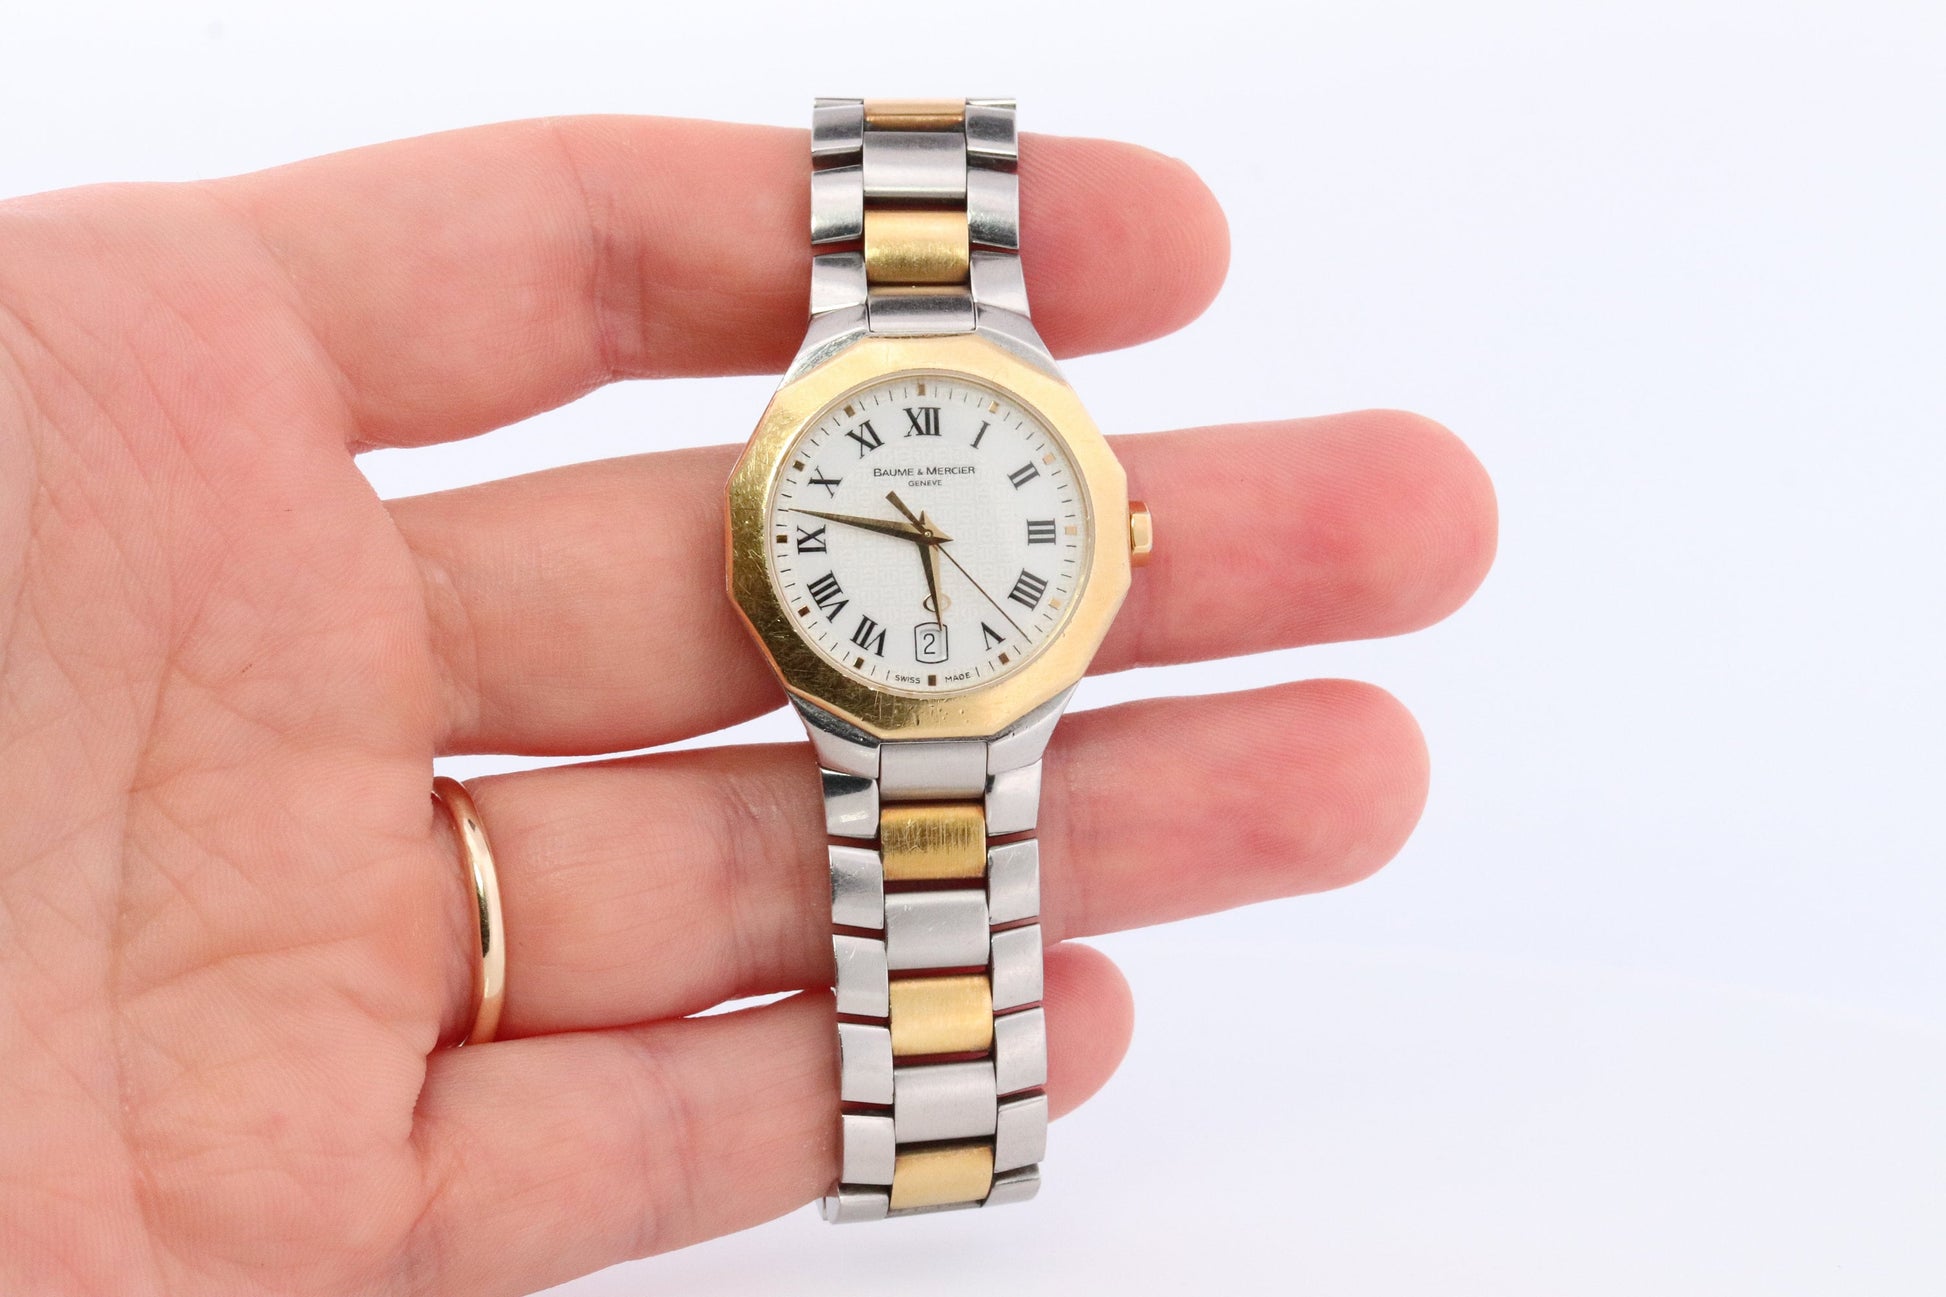 Vintage Baume and Mercier watch. Baume Mercier 65473 Riviera 18k Yellow Gold Stainless Steel. Two Tone Color Date watch